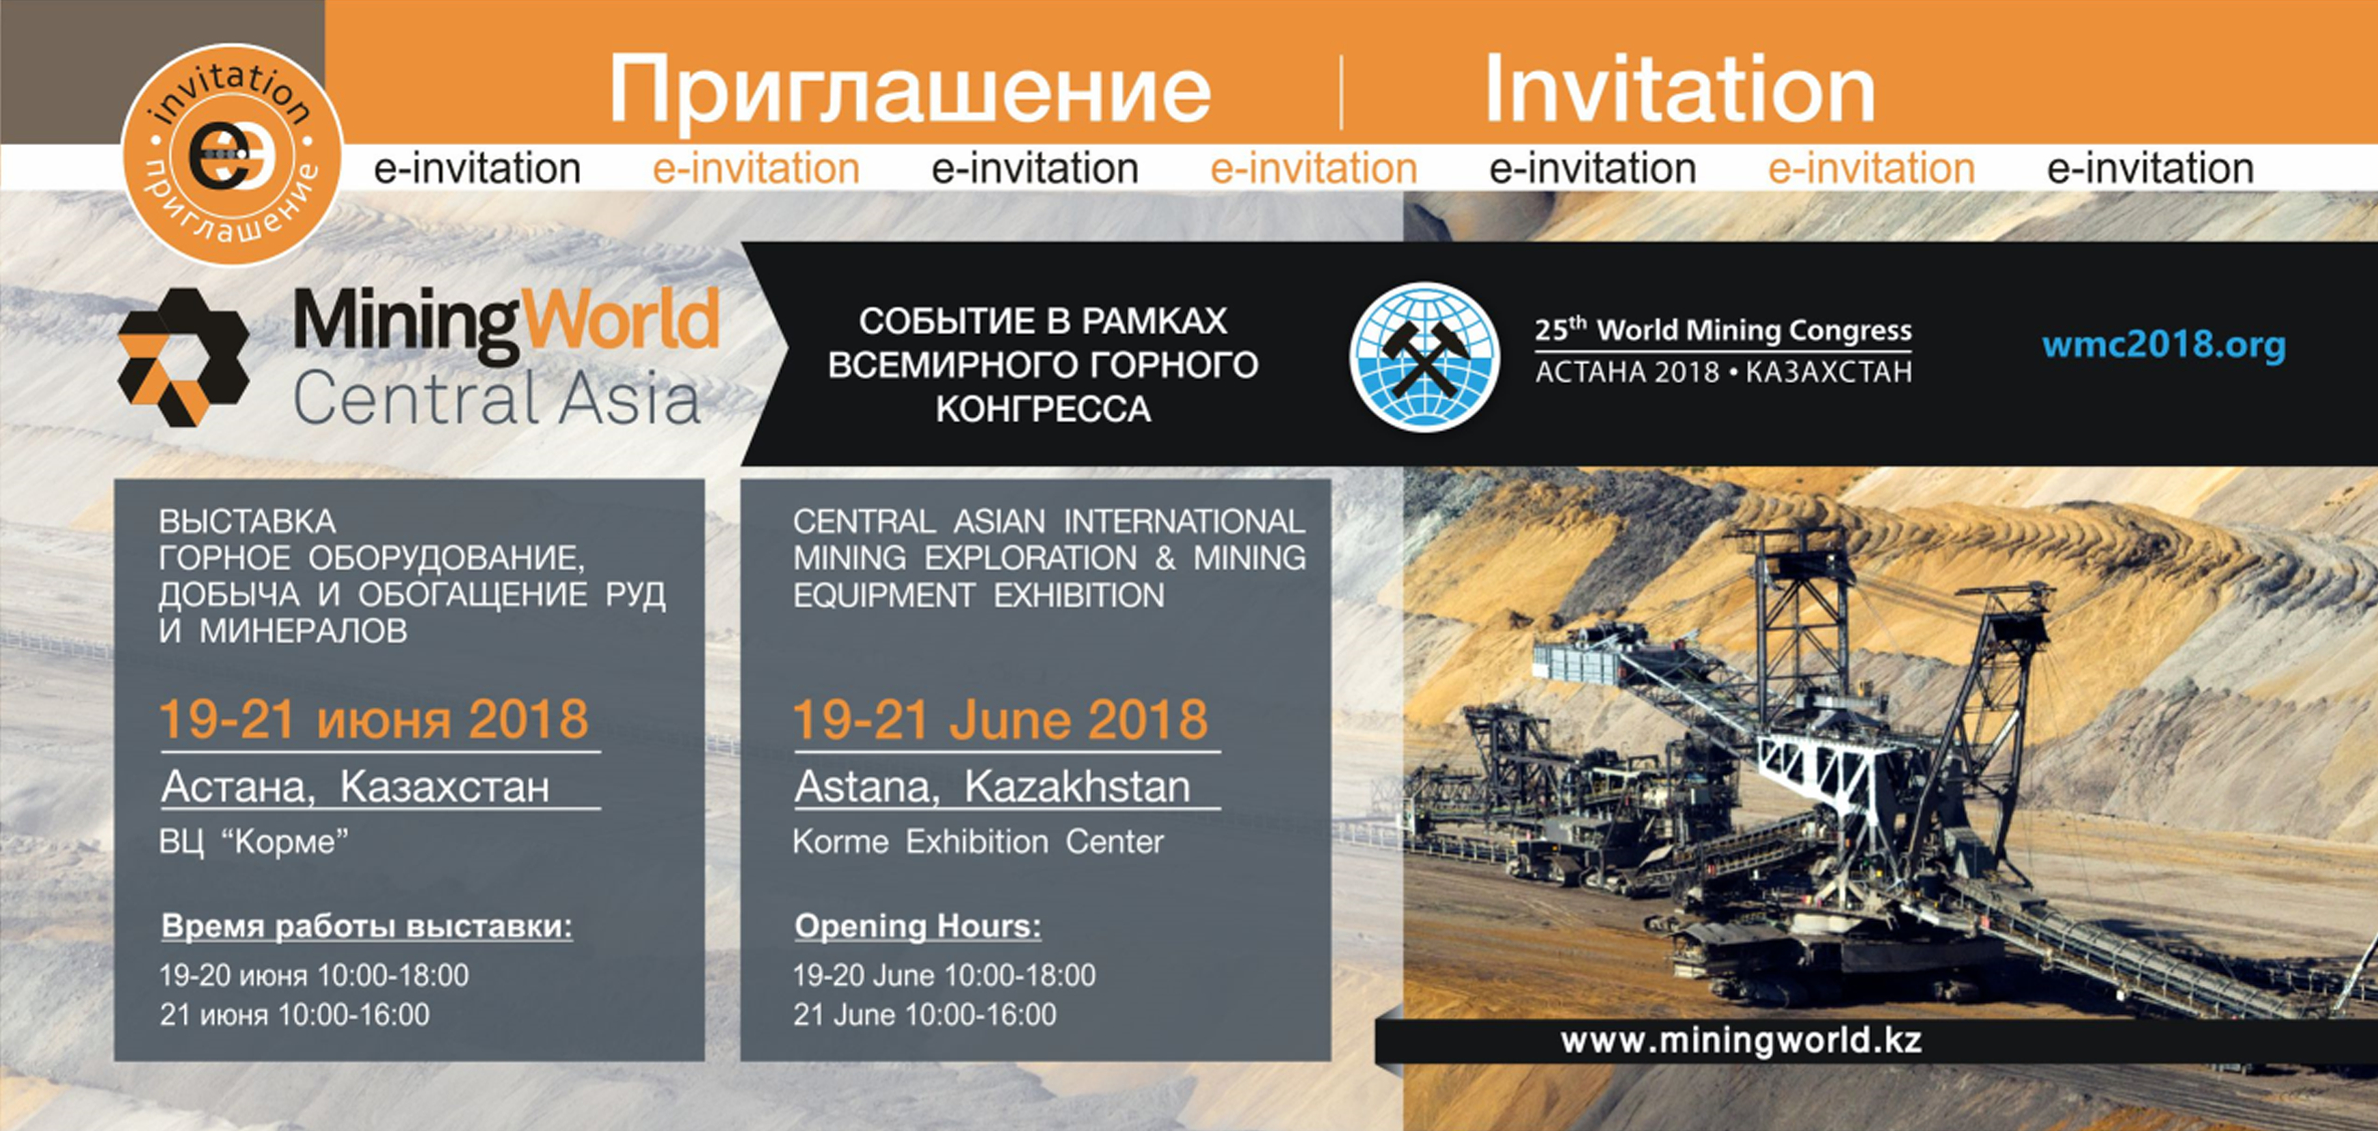 Mining World Central Asia 2018